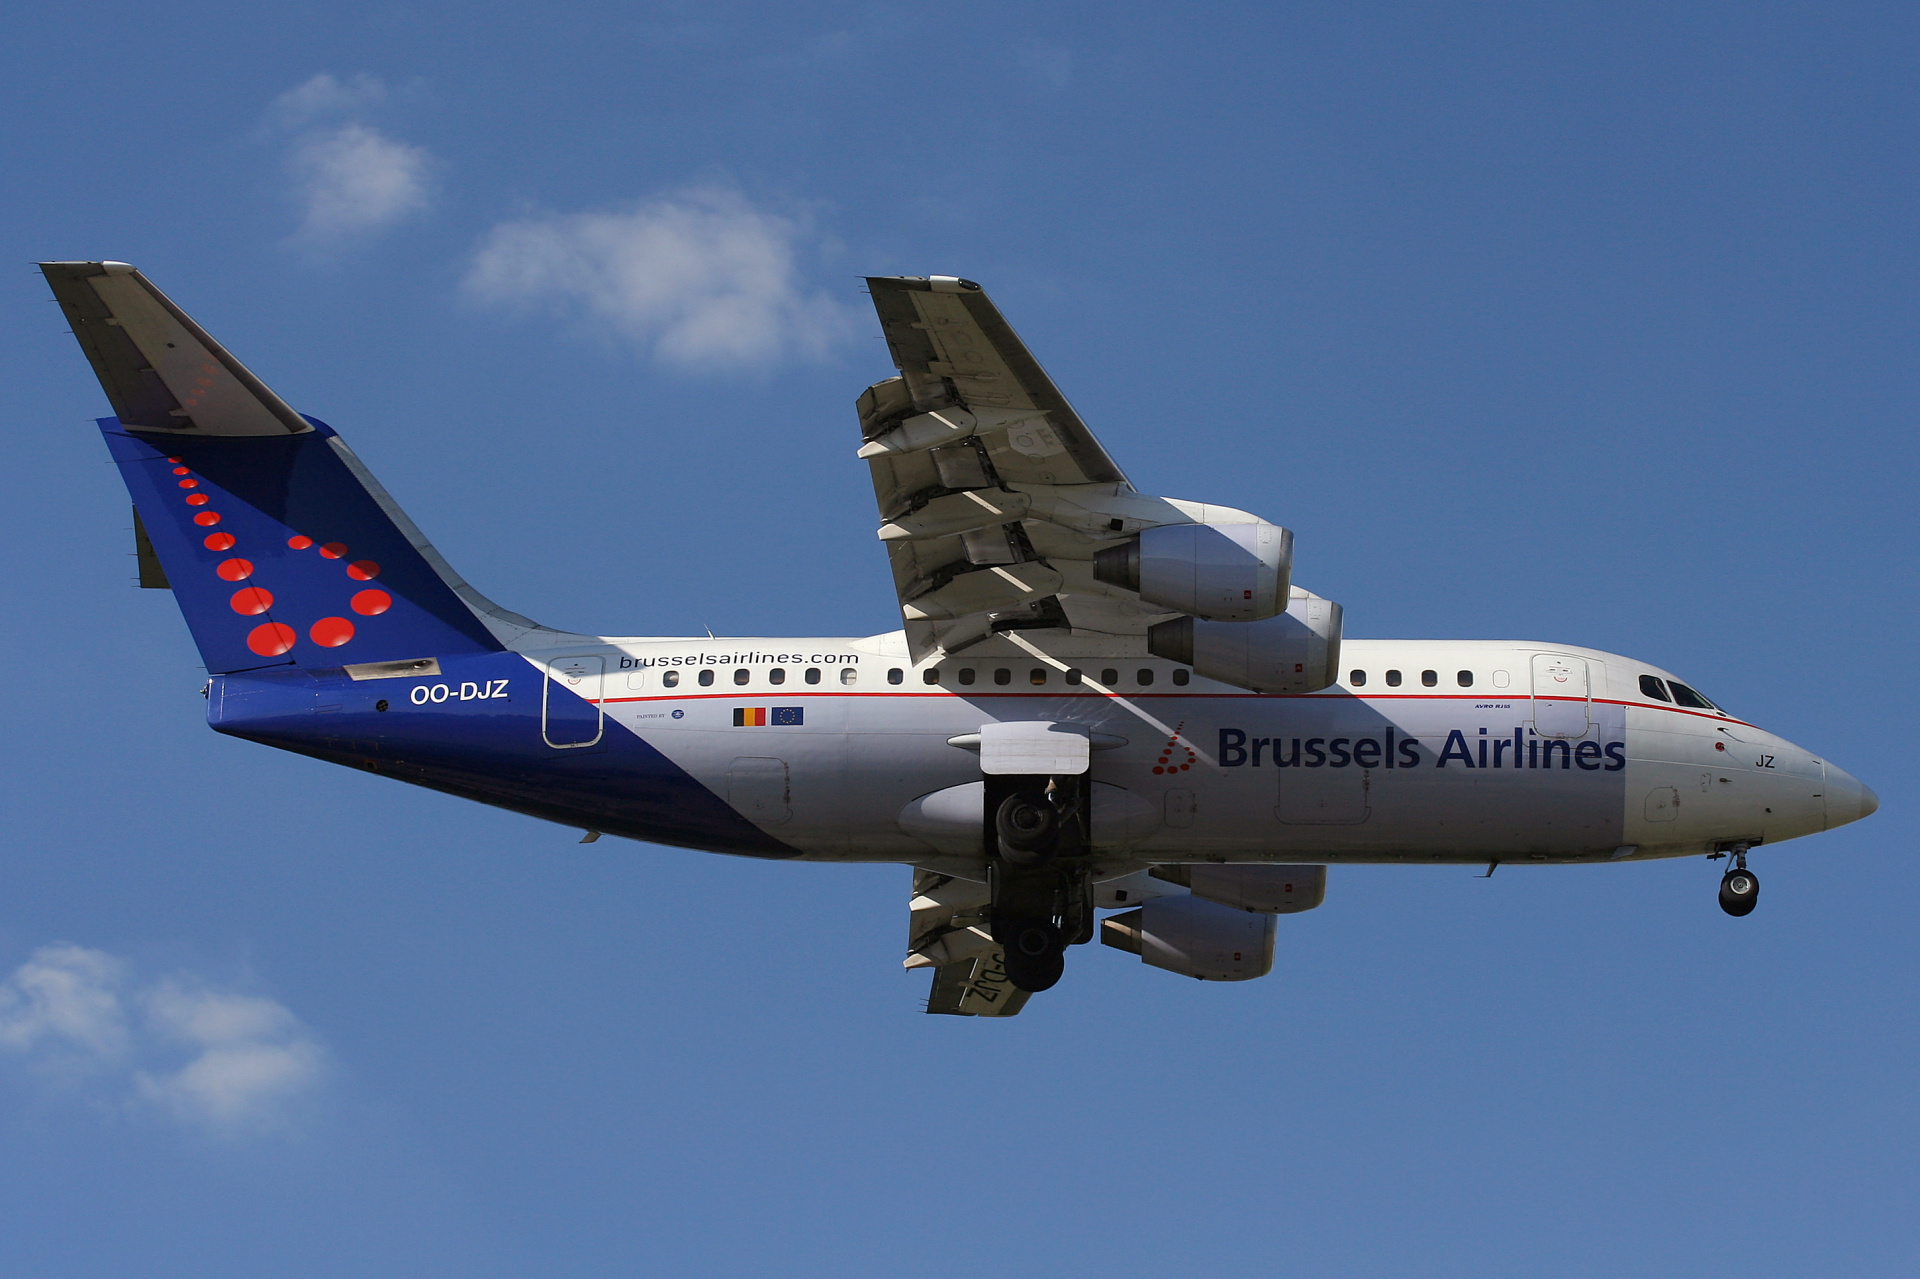 OO-DJZ (Aircraft » EPWA Spotting » BAe 146 and revisions » Avro RJ85 » Brussels Airlines)